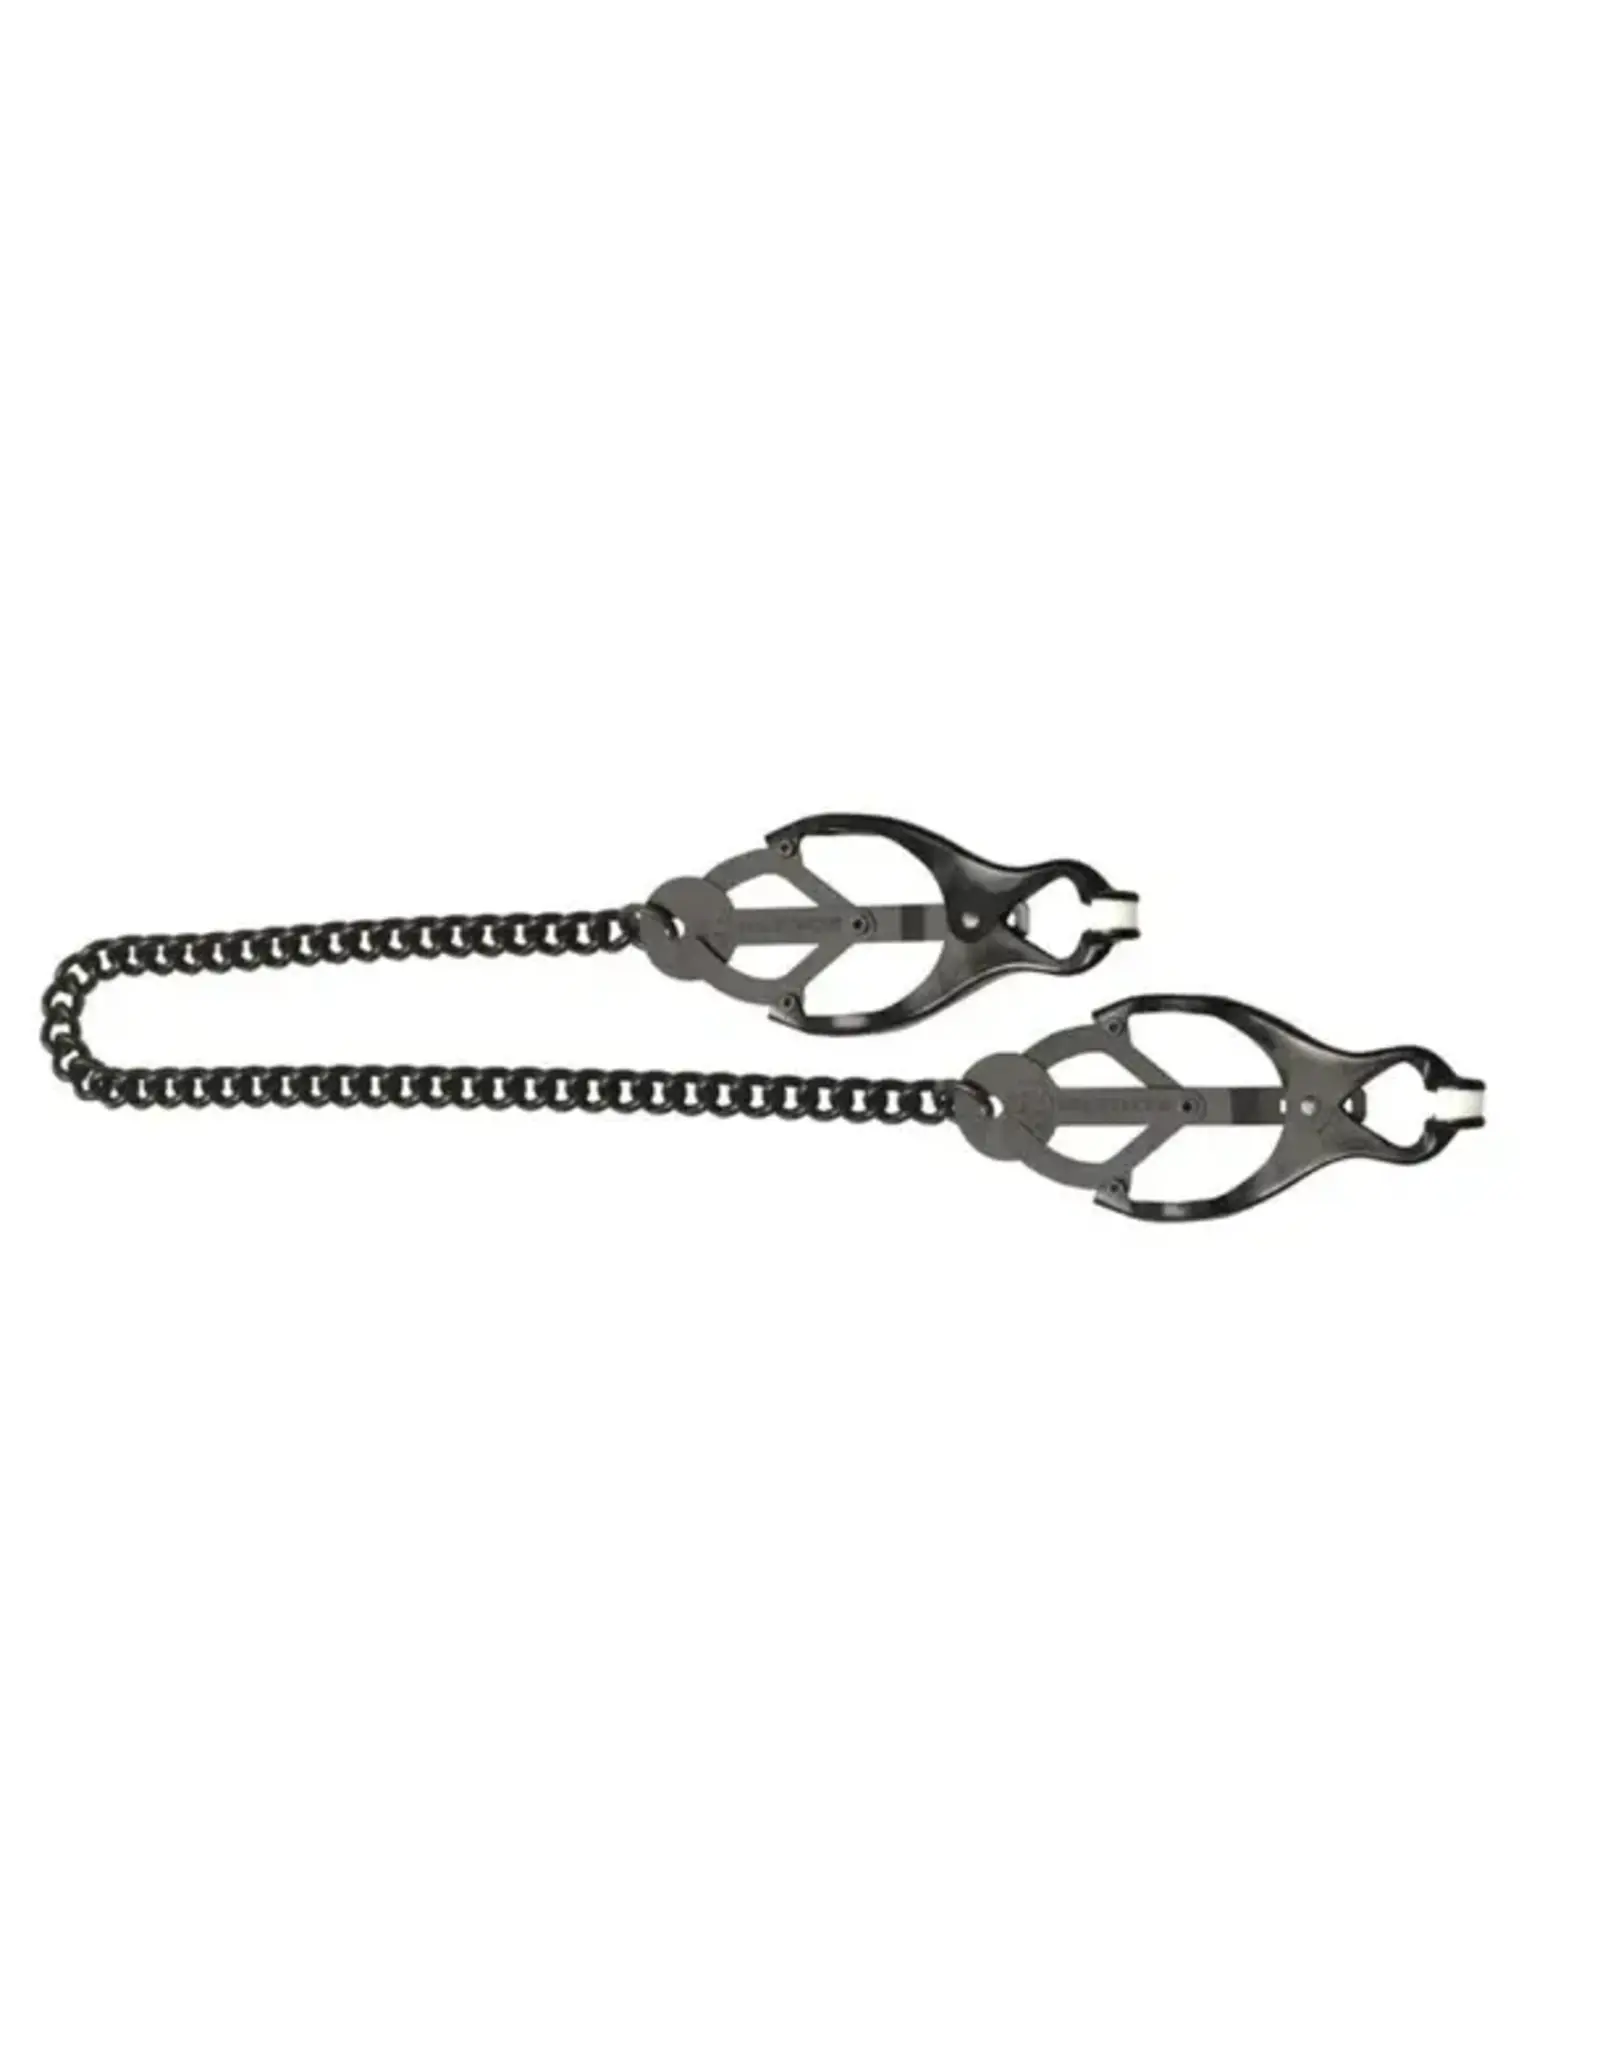 Spartacus Spartacus Butterfly Nipple Clamps with Black Chain